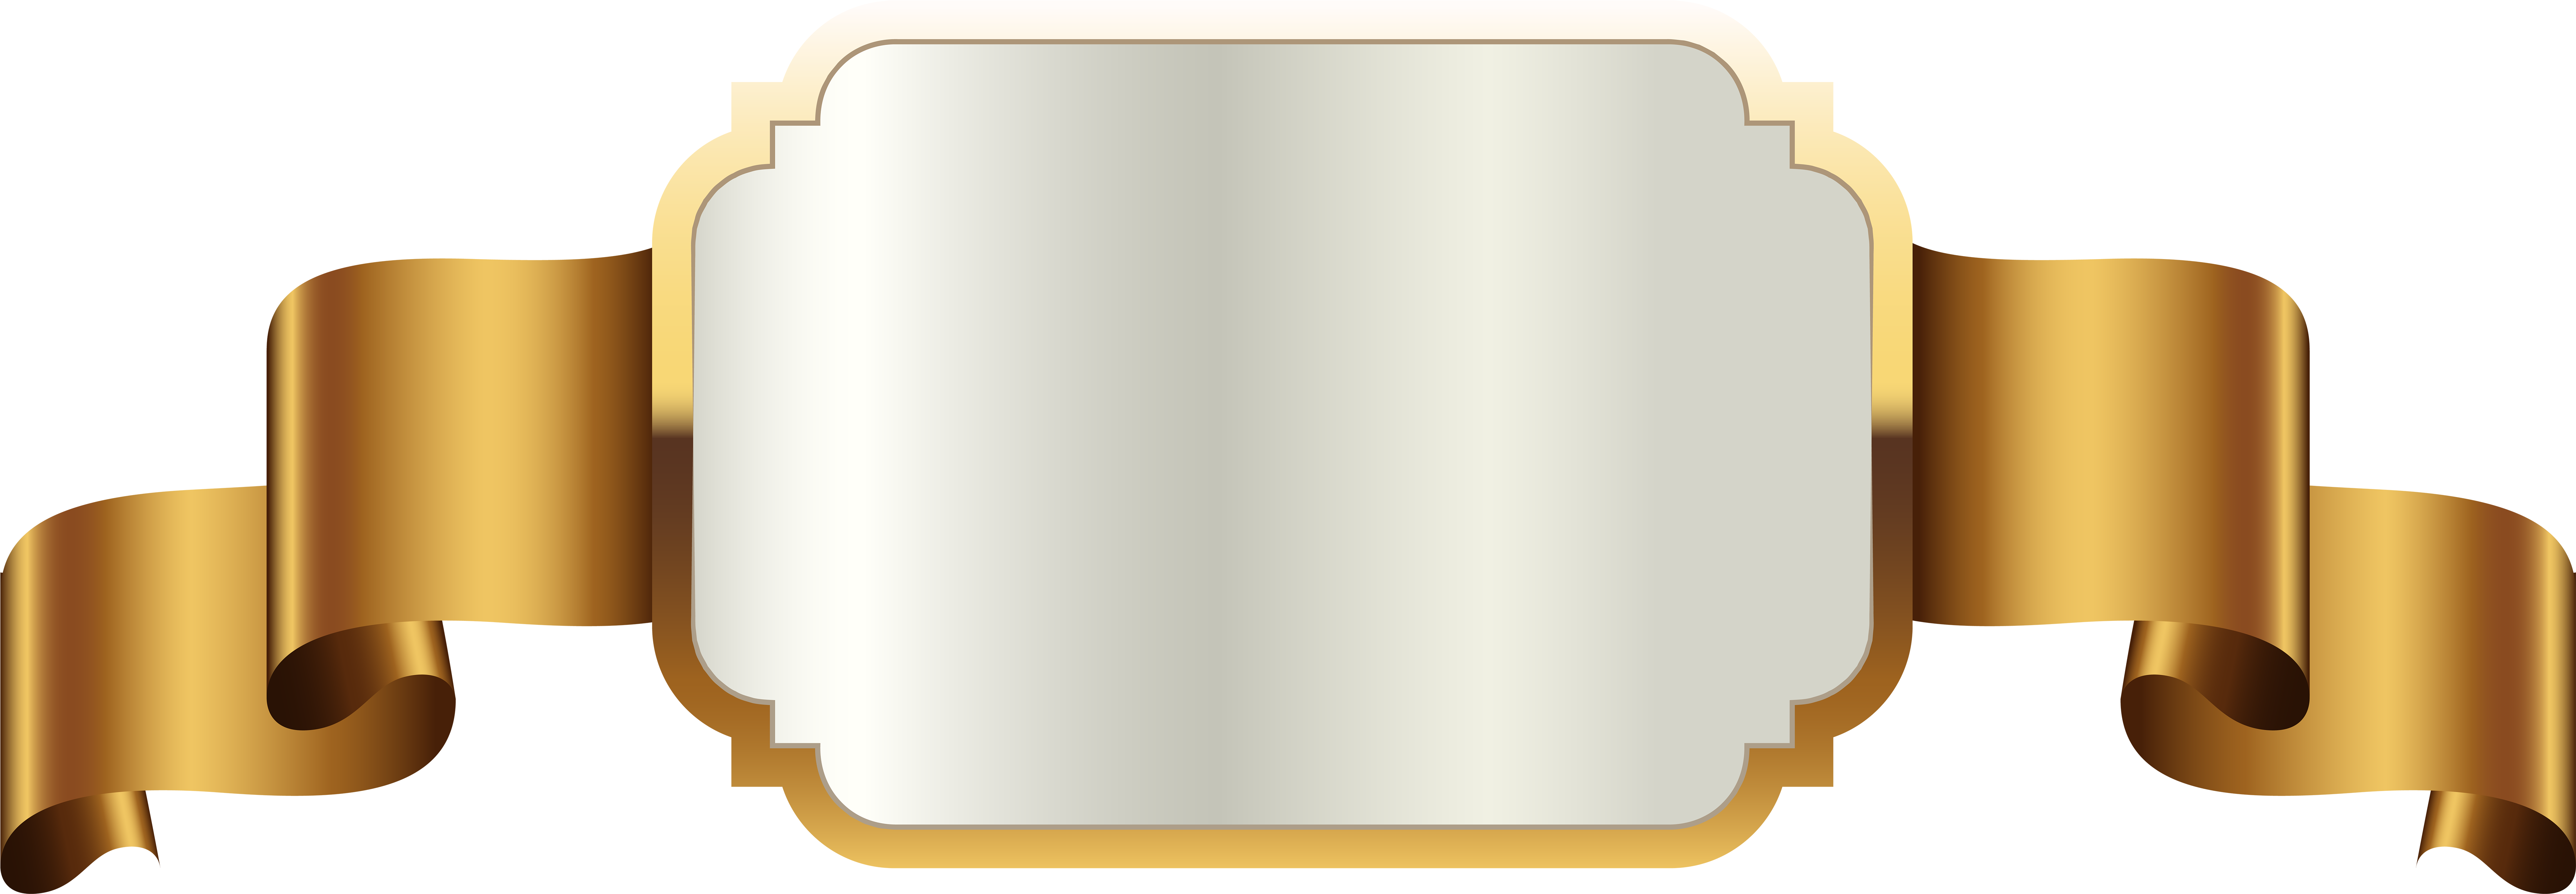 A White Square With A Gold Border